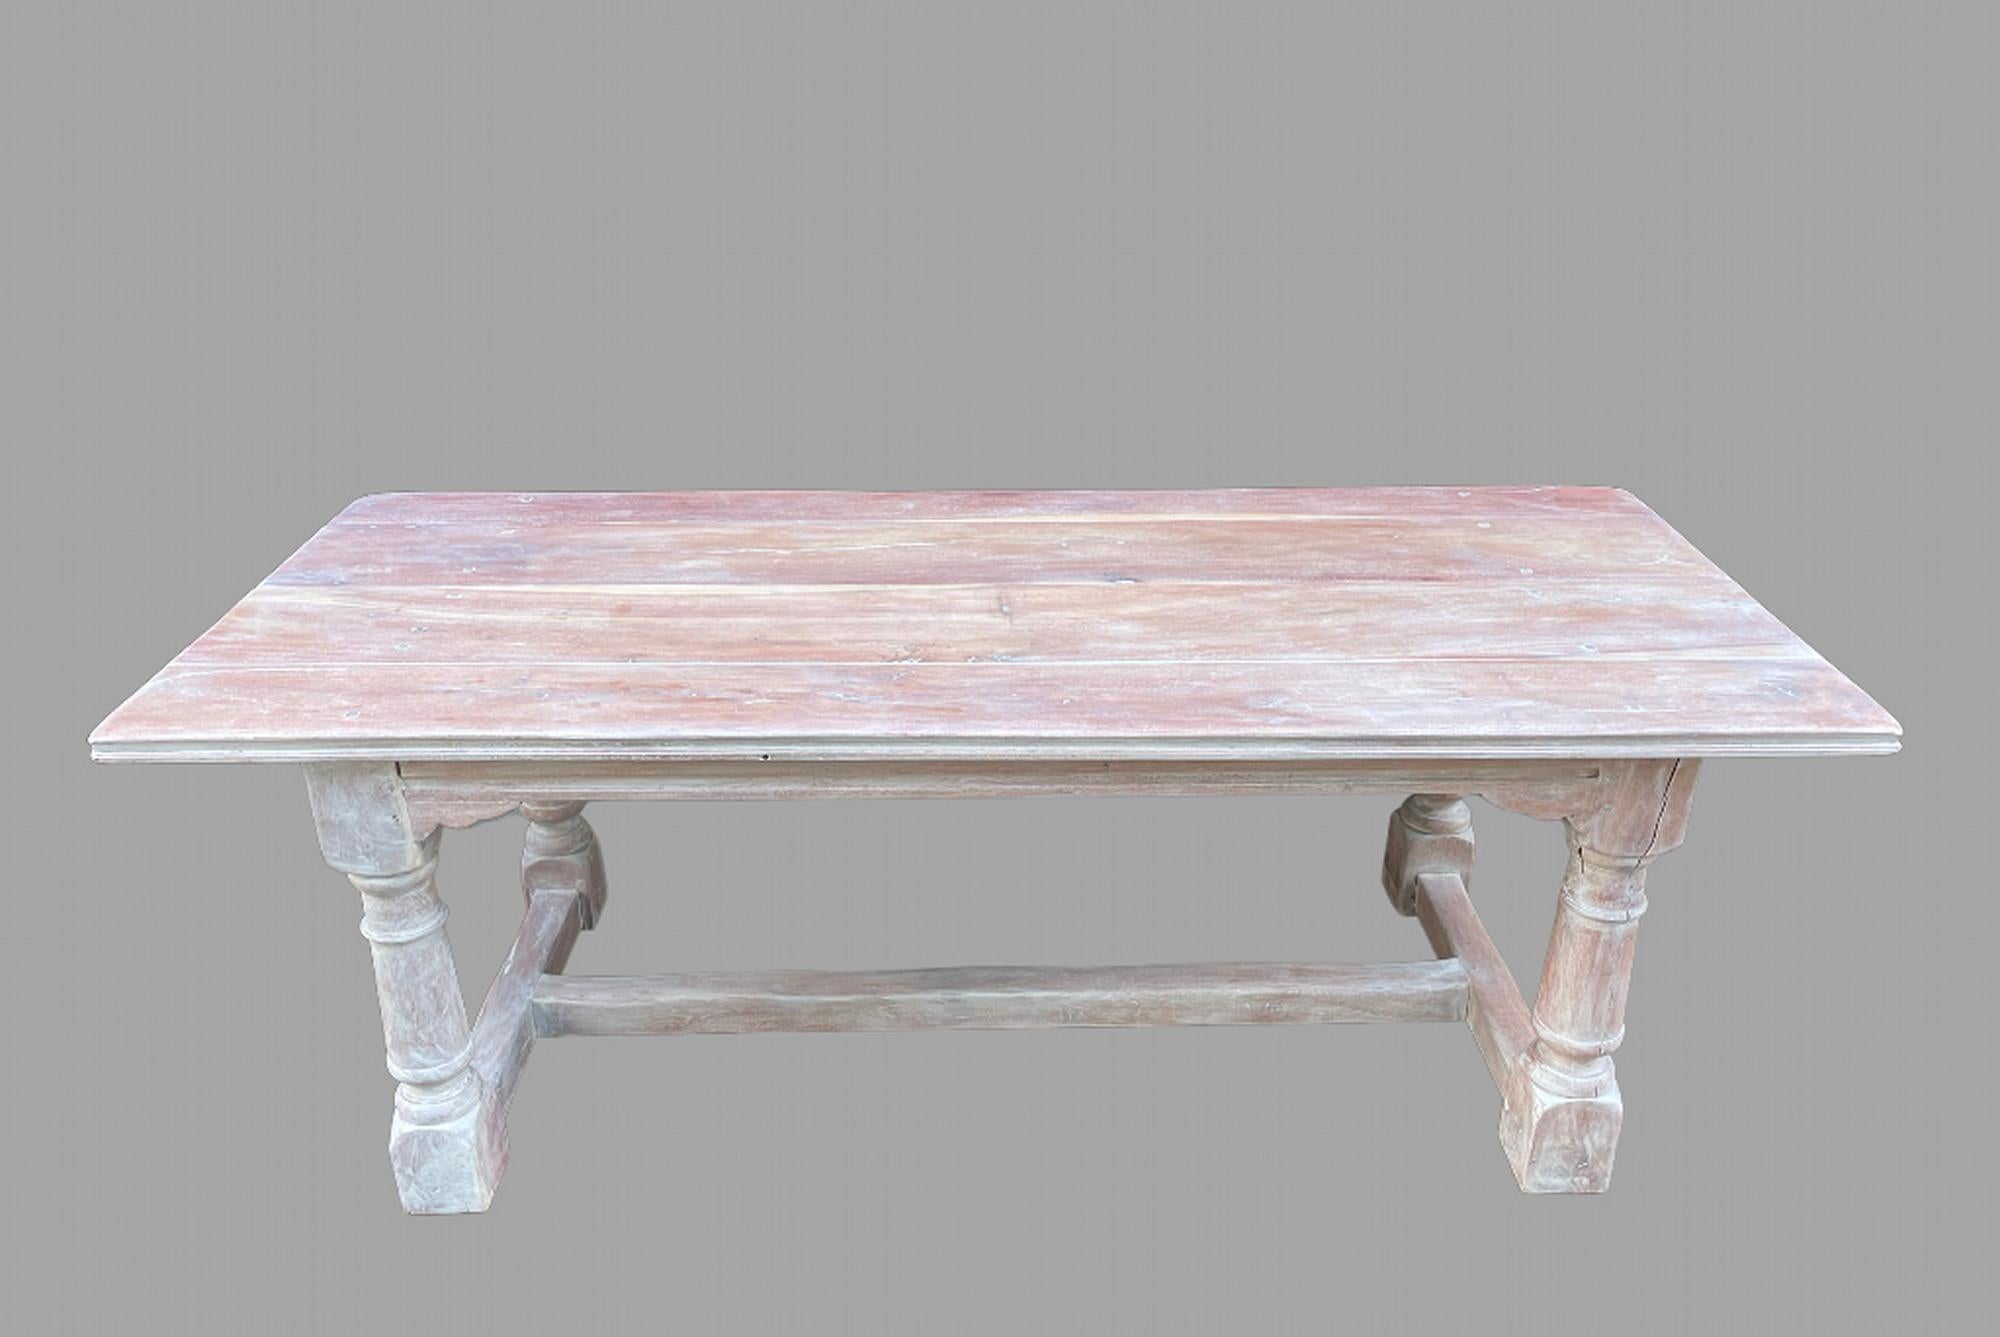 An attractive stripped and limed  Cherrywood refectory/farmhouse table with H stretcher, showing the lighter and darker parts of the Fruitwood Cherry.

Measures: Length 214 cm, Width 92 cm and Height 75 cm with Knee Height 65 cm.